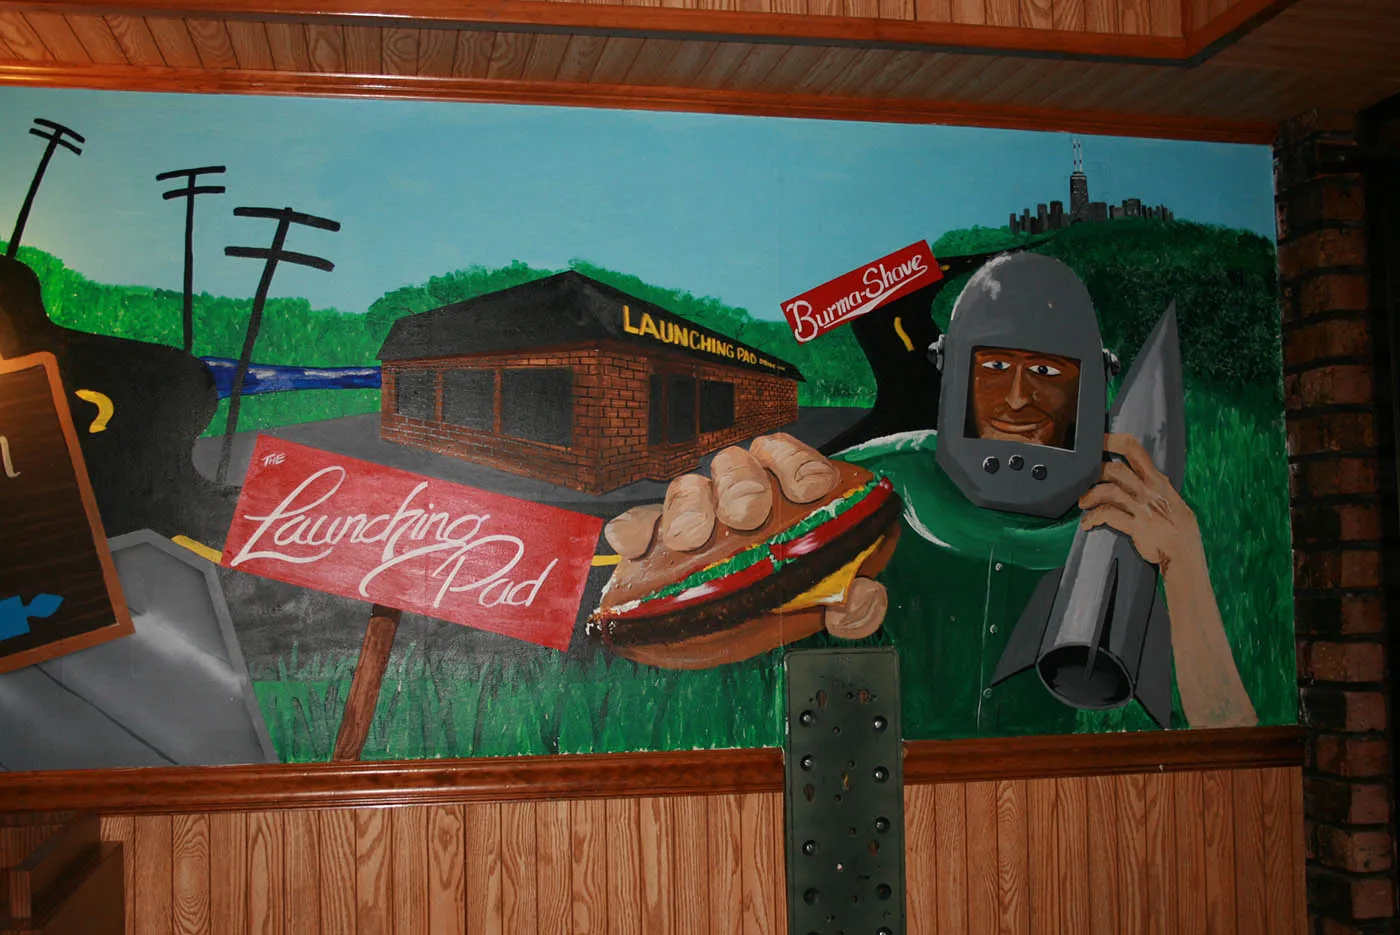 Gemini Giant Mural at the Launching Pad in Wilmington, Illinois